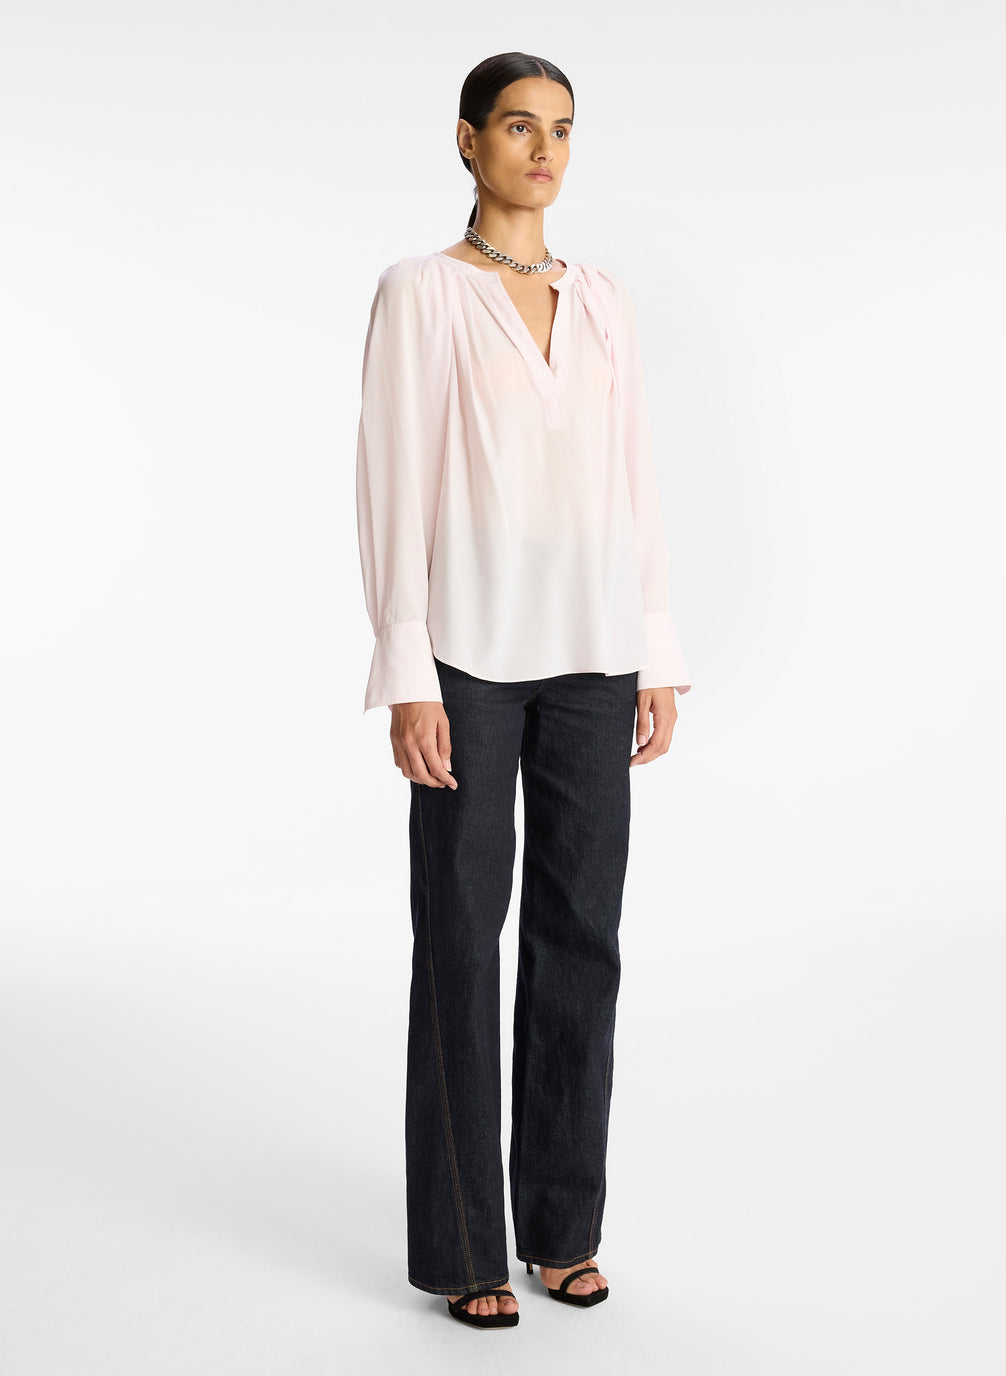 side view of woman wearing light pink v neck long sleeve silk top and dark wash denim jeans